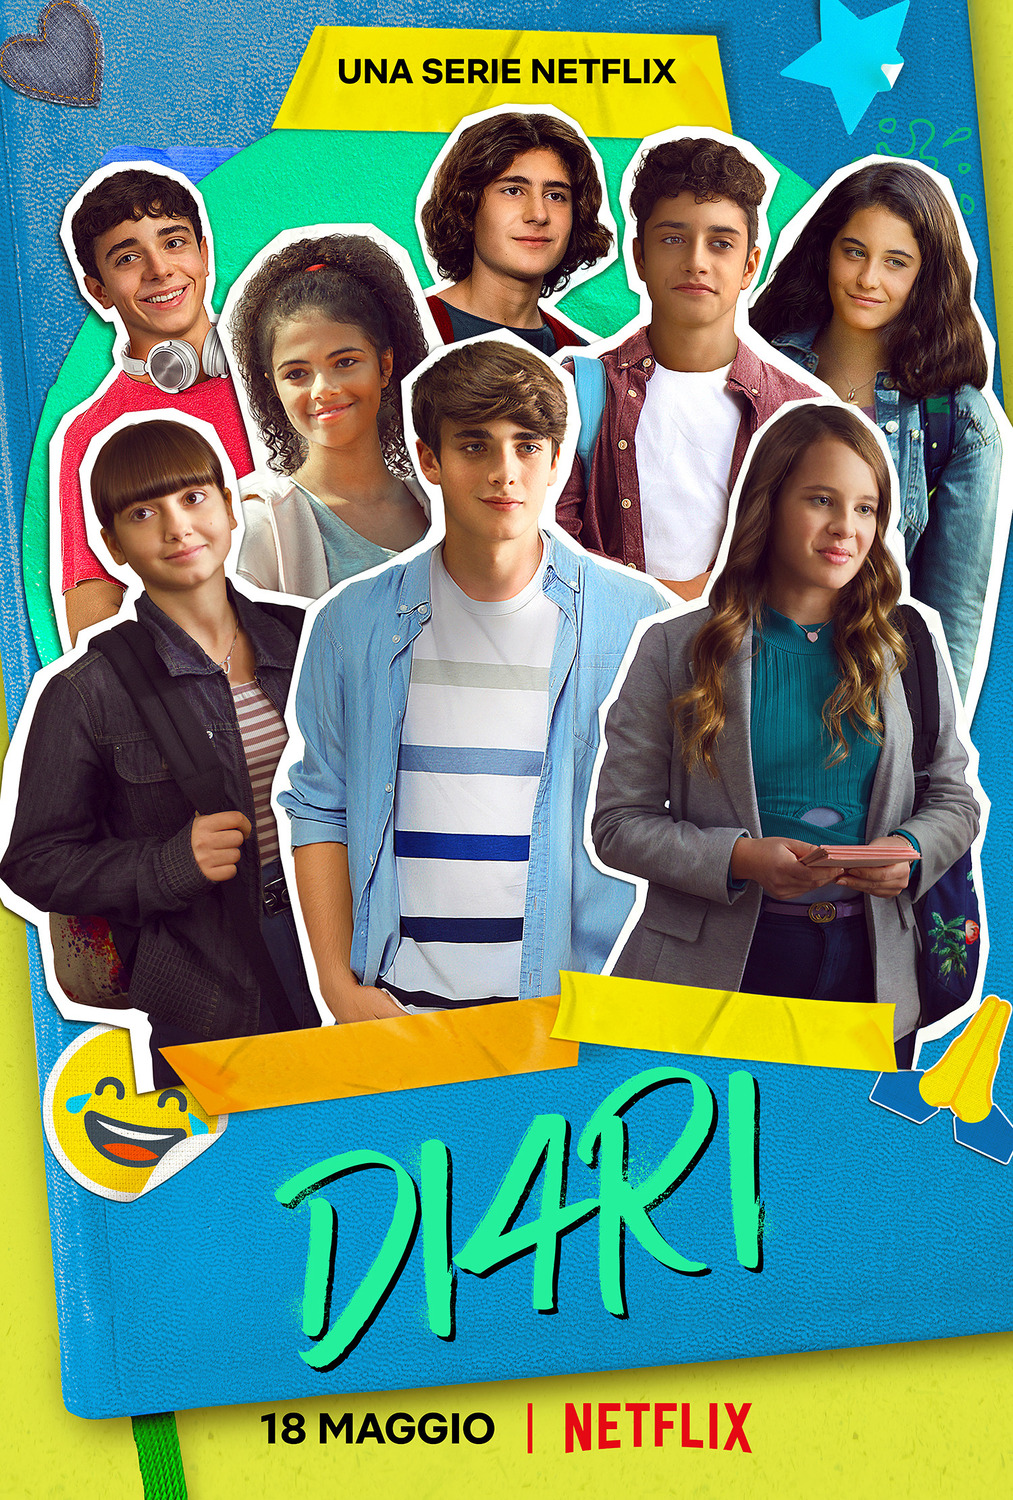 Extra Large TV Poster Image for Di4ri 